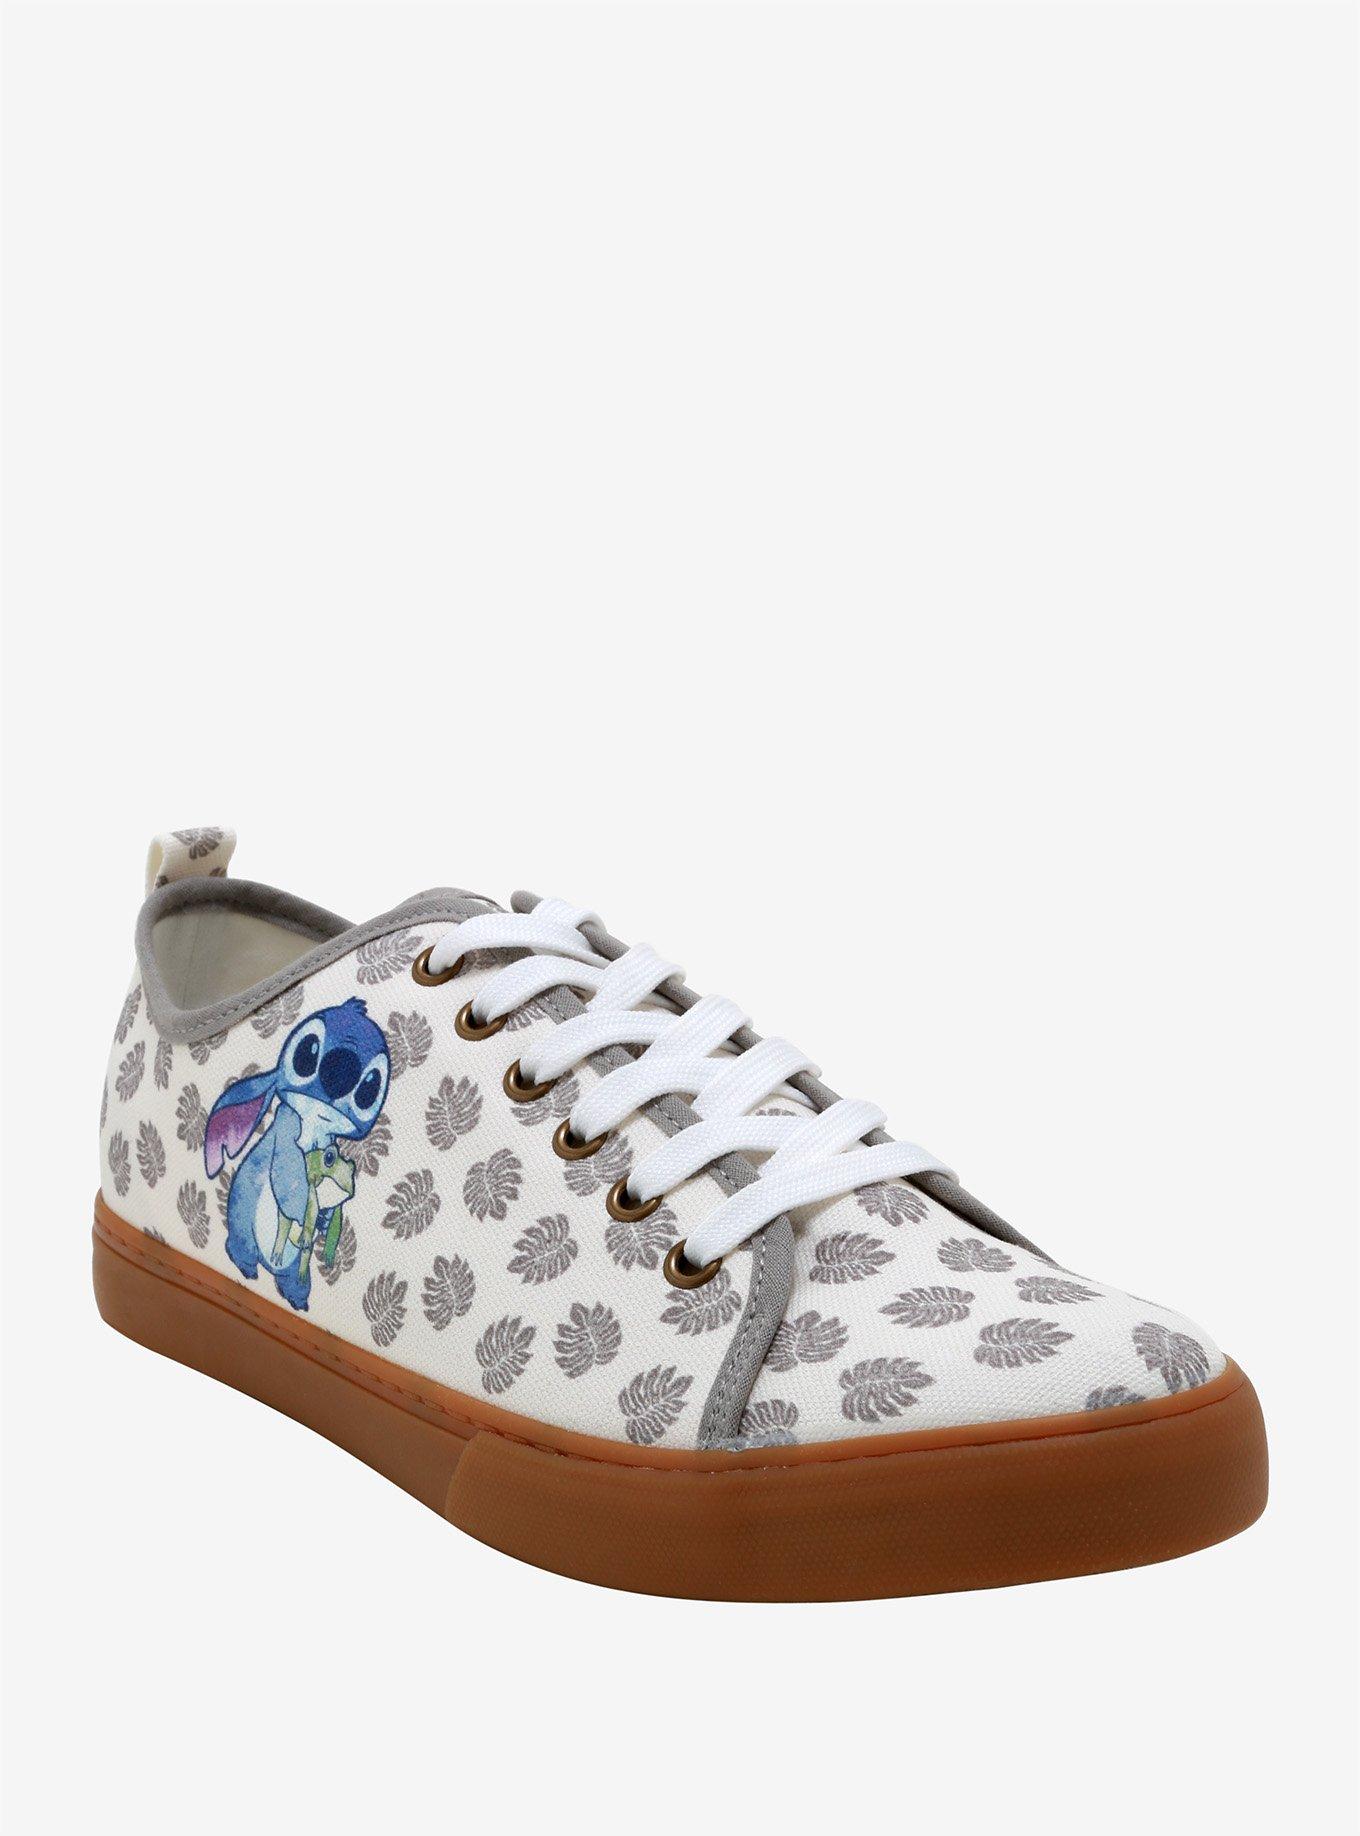 Disney Lilo & Stitch Frog Leaf Canvas Sneakers | Hot Topic